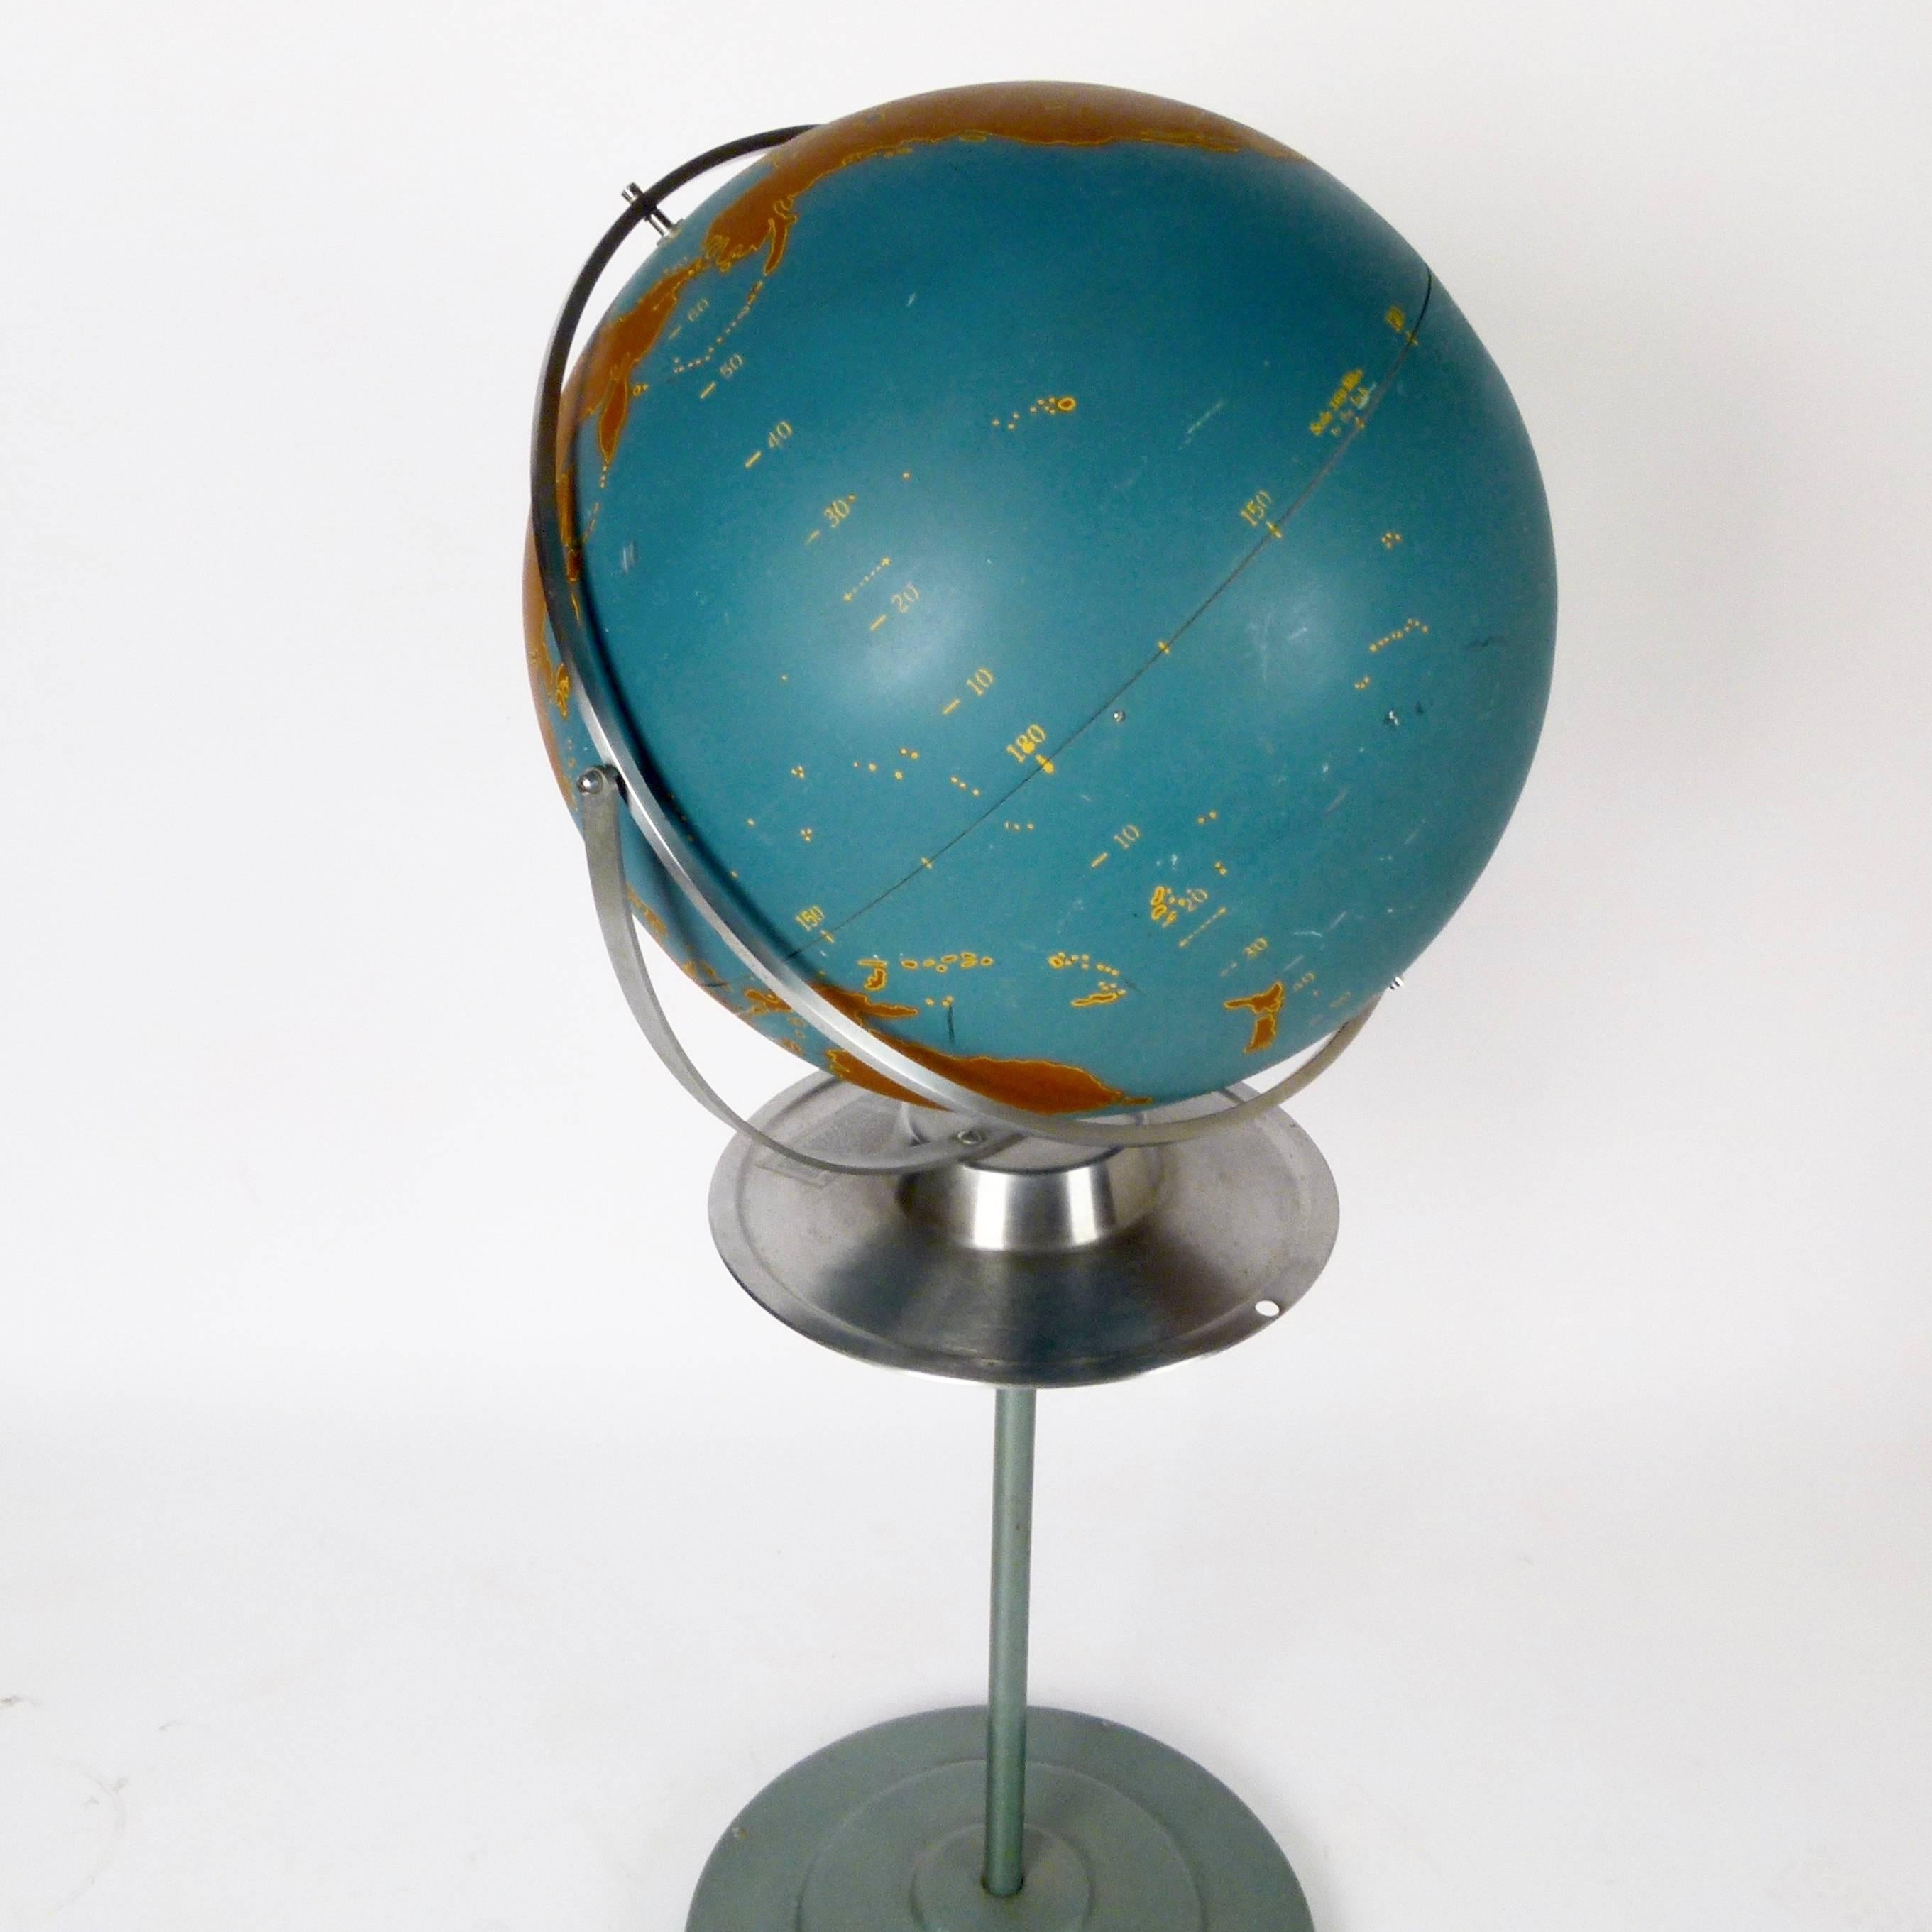 1960s large metal orb globe on telescoping or removable rolling stand with delineated continents, oceans, latitude and longitude numbers, but no geographical names. The globe was originally sold by A.J. Nystom Co. as a teaching tool.